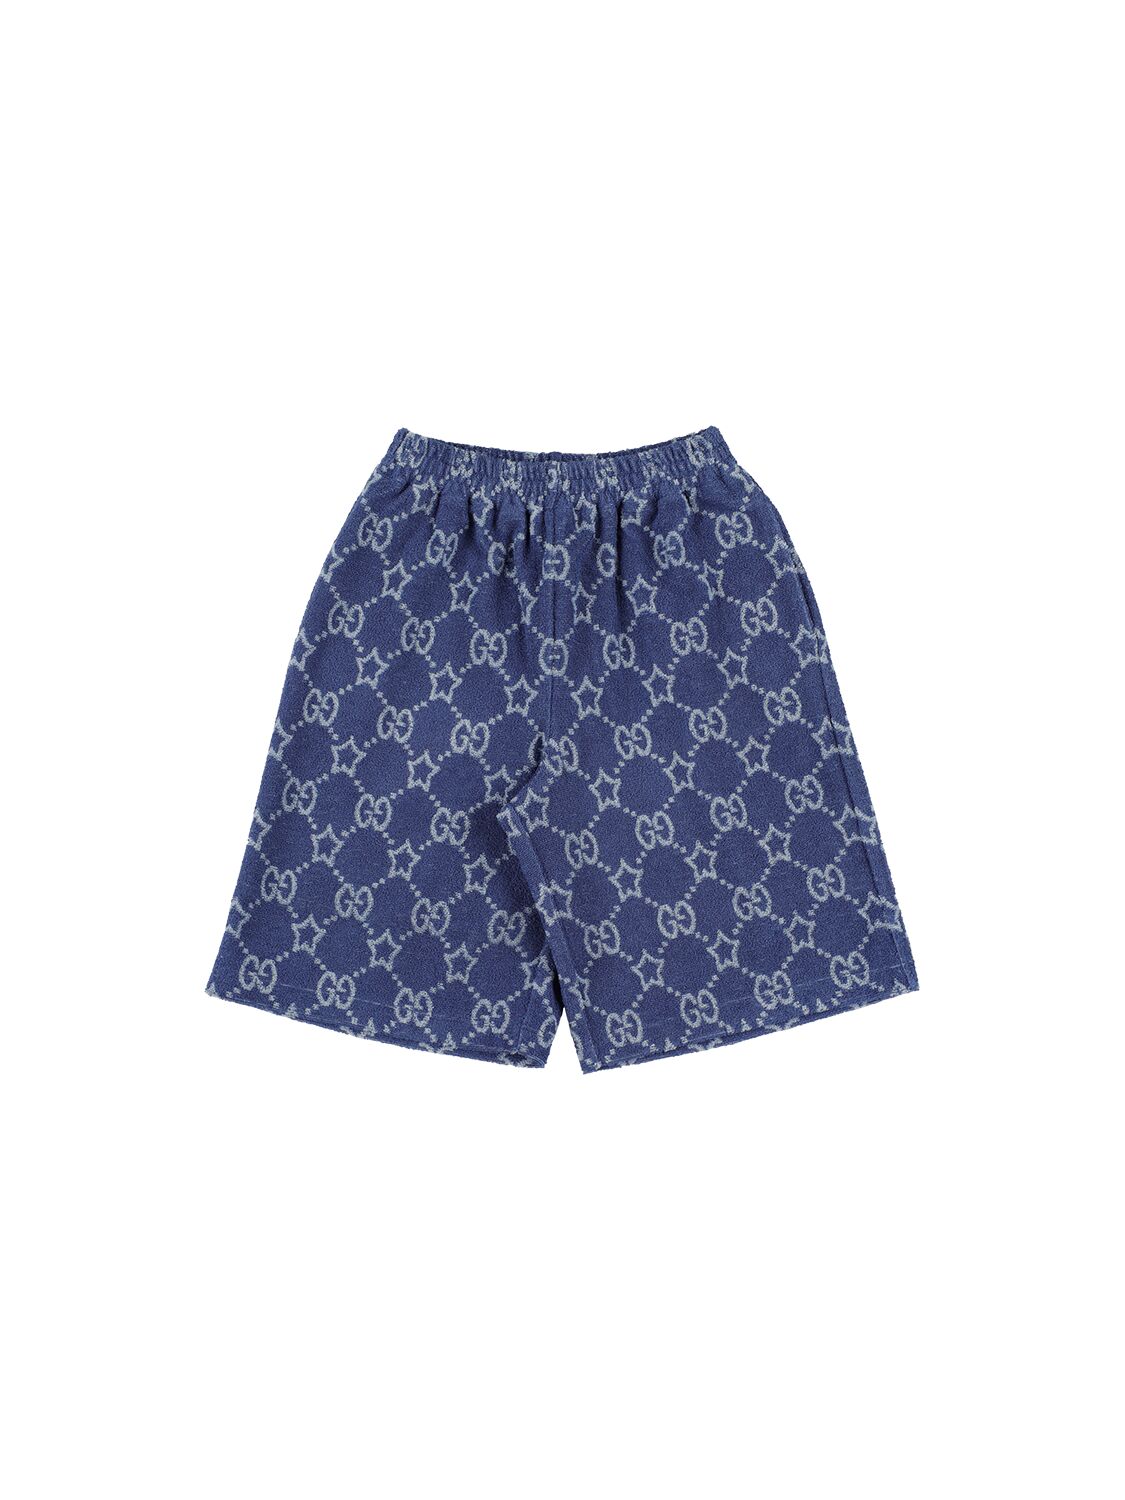 Image of Gg Cotton Blend Shorts